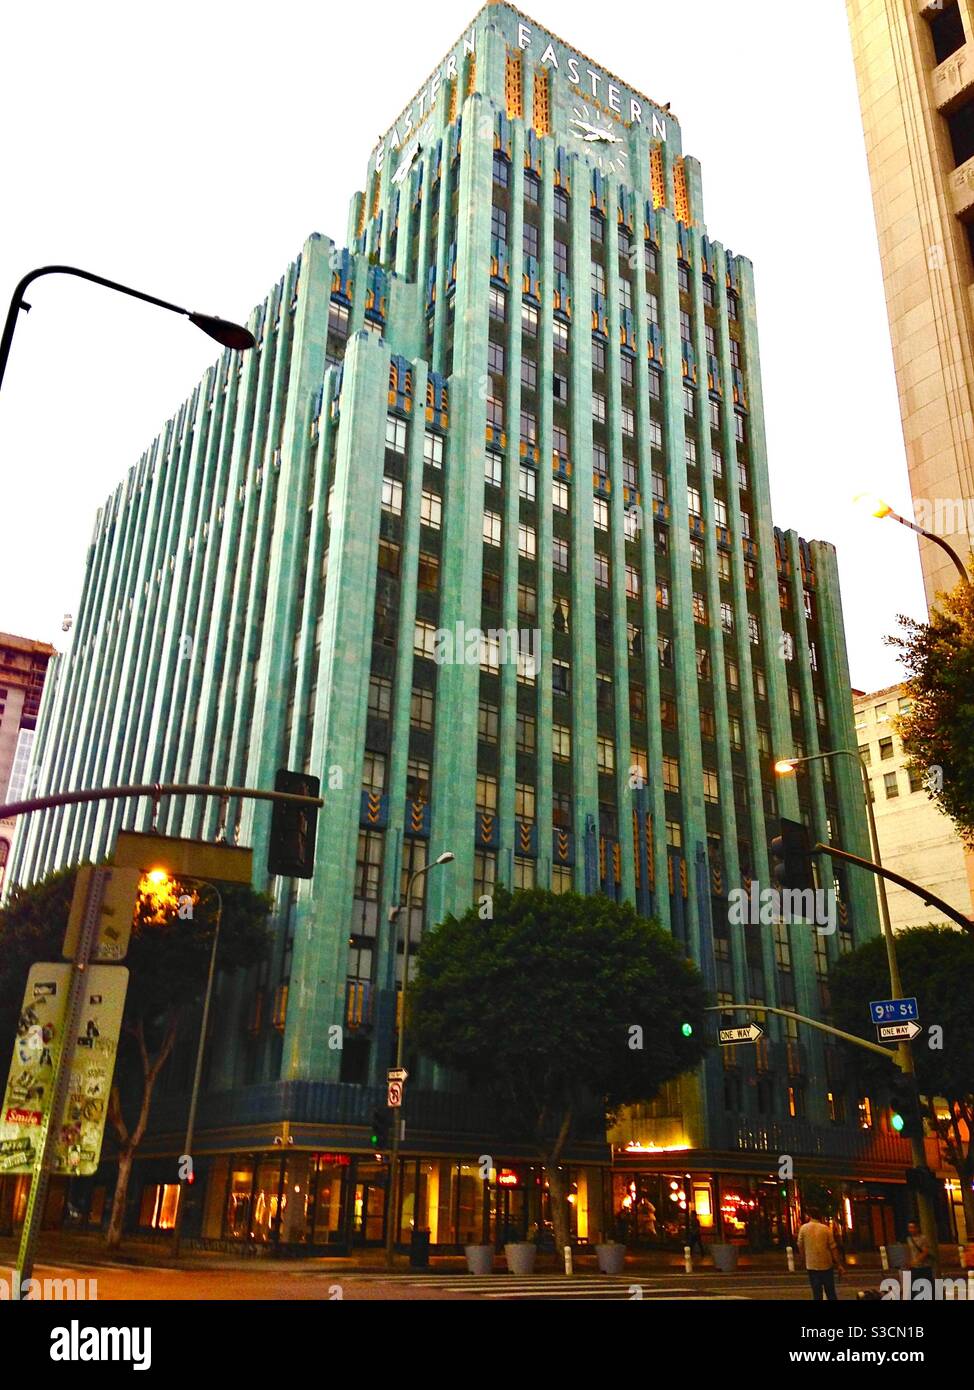 The beautiful turquiose art deco Eastern Columbia Building in the Broadway theater district of downtown Los Angeles was designed by Claud Beelman, built in 1930 & features a four-sided clock tower. Stock Photo